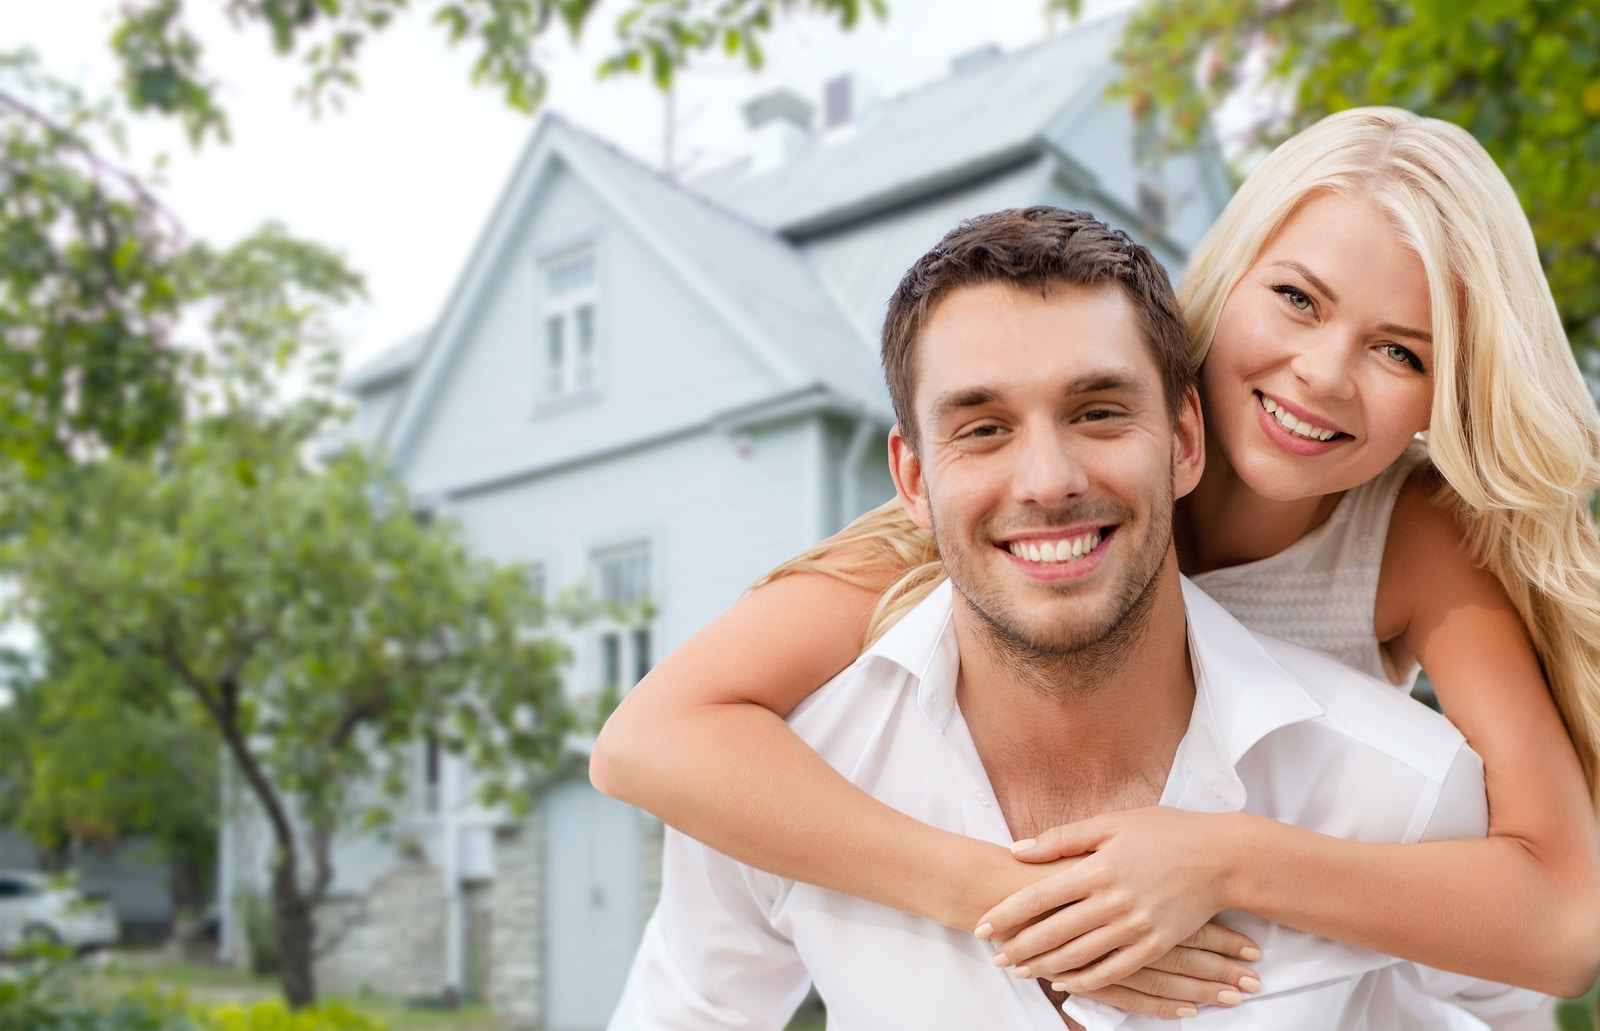 Smiling Couple with House in the background